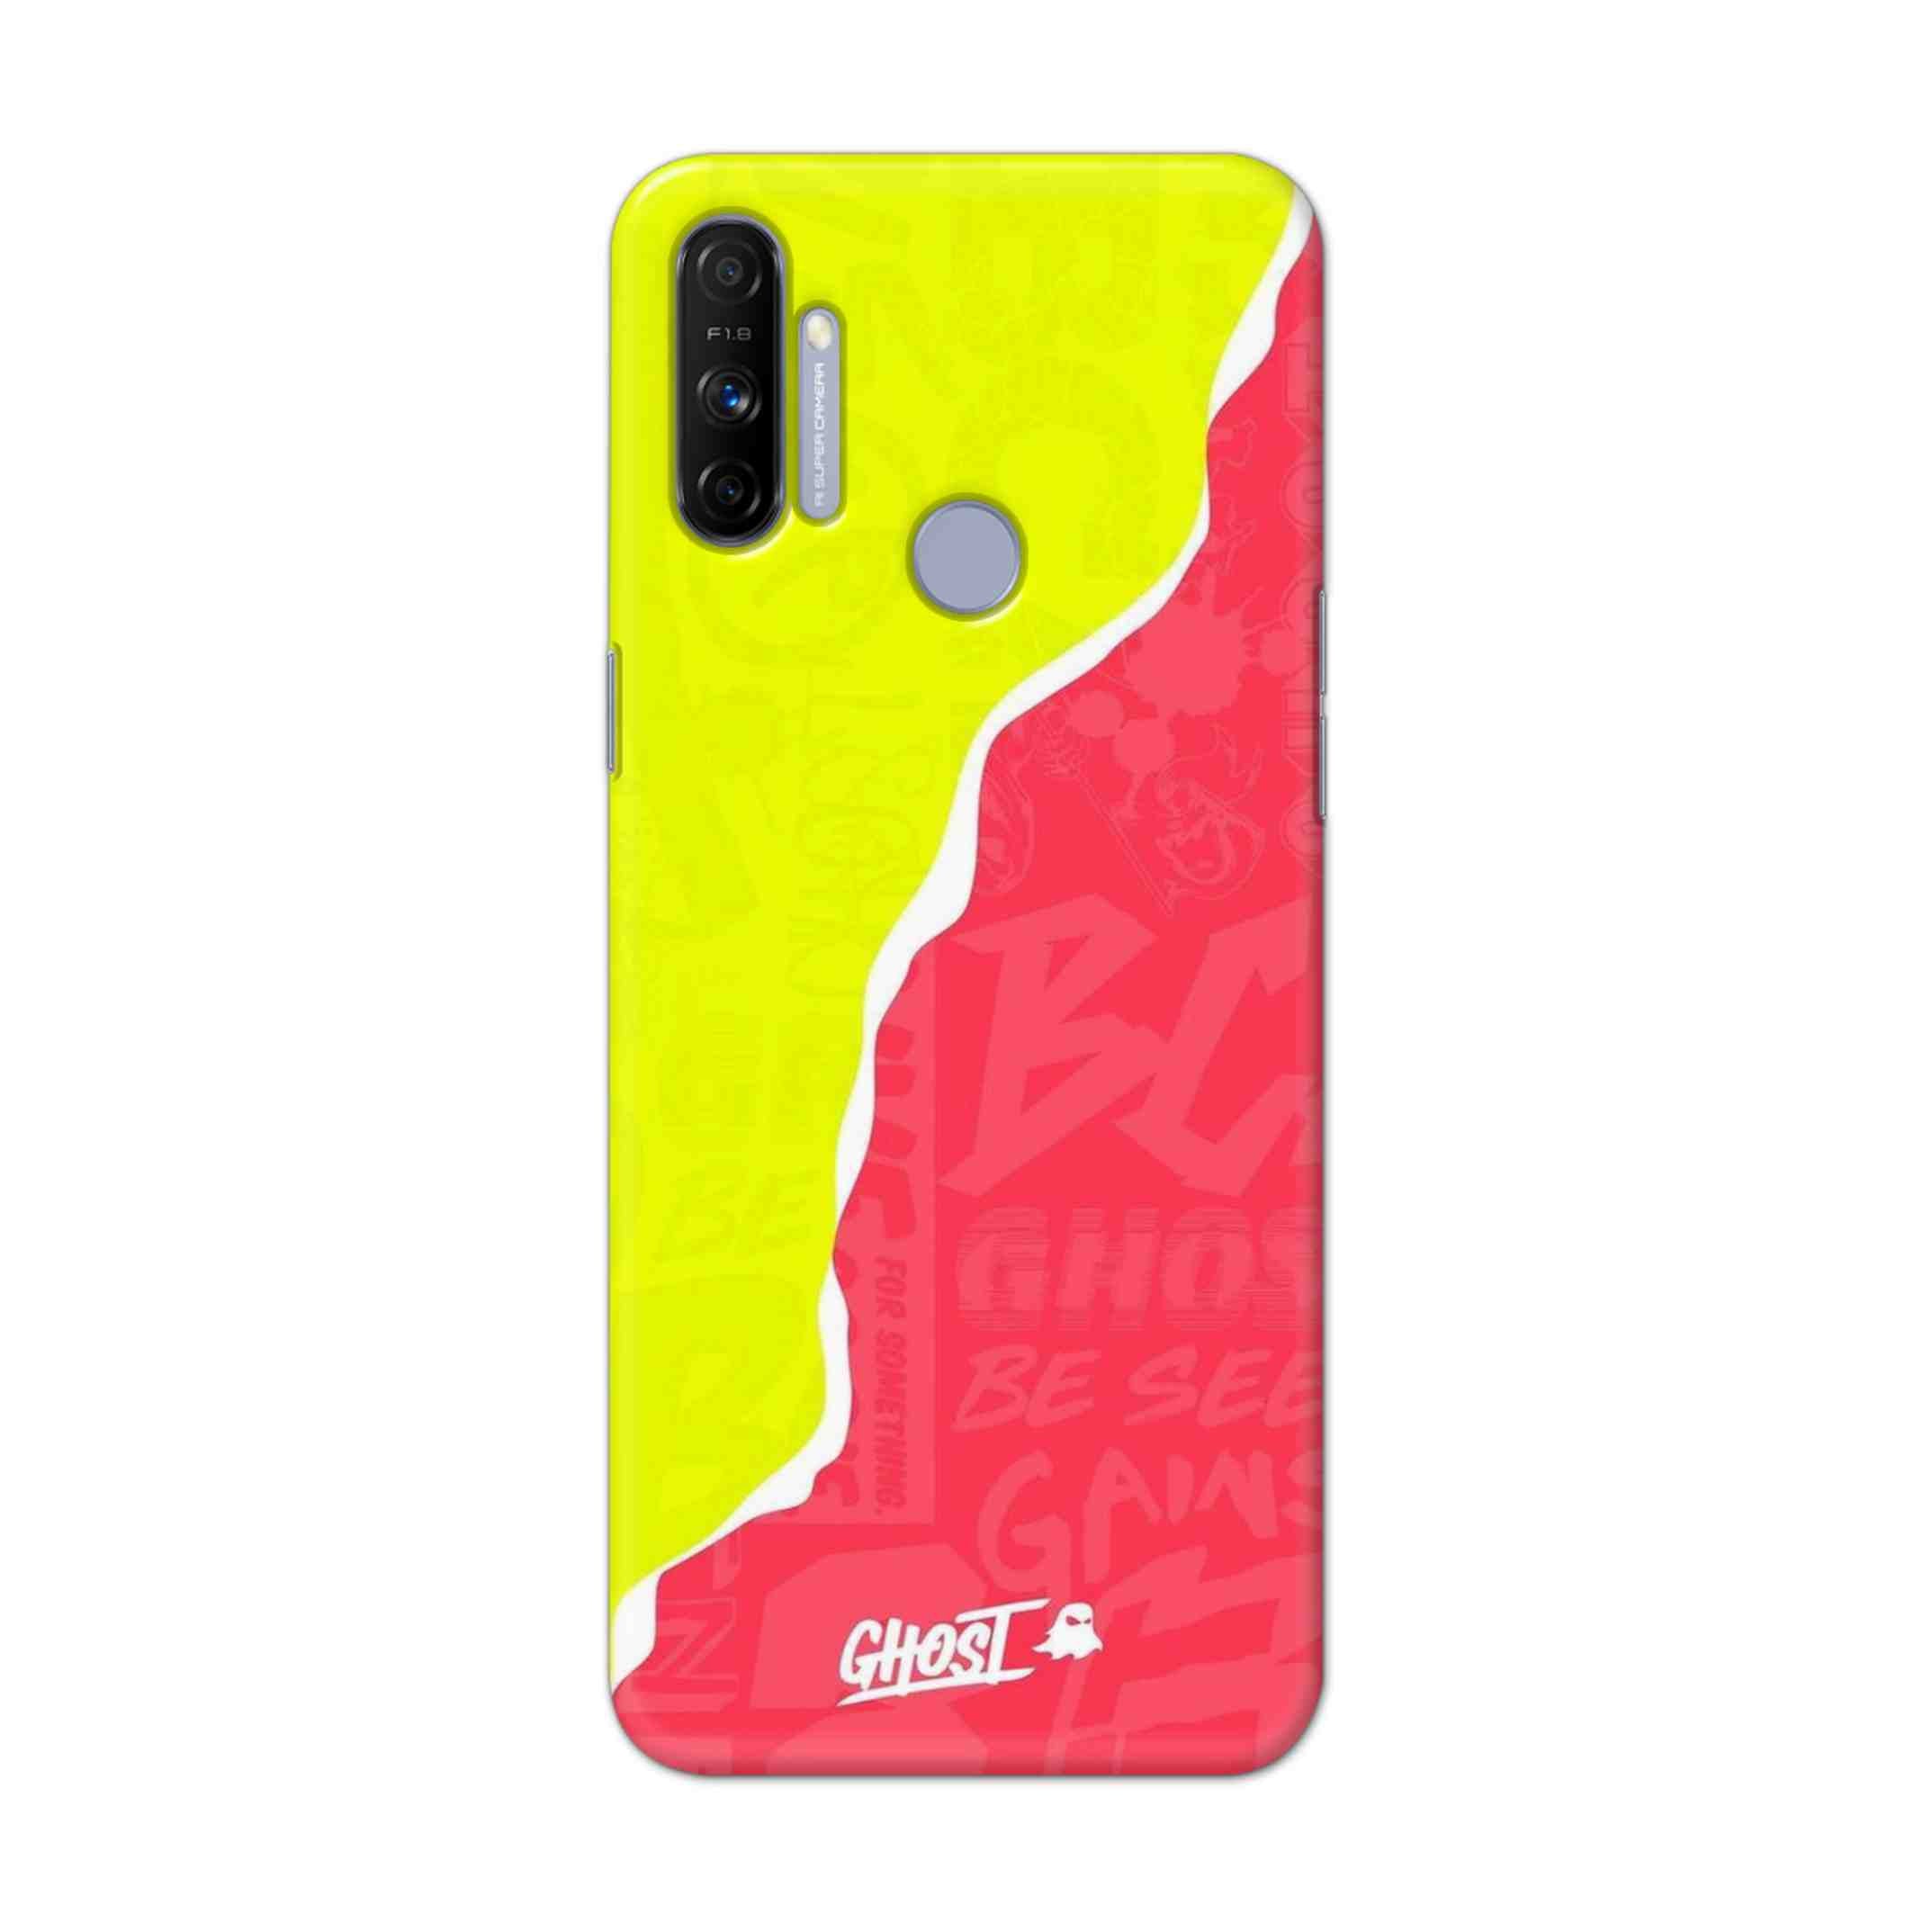 Buy Ghost Hard Back Mobile Phone Case Cover For Realme Narzo 20A Online